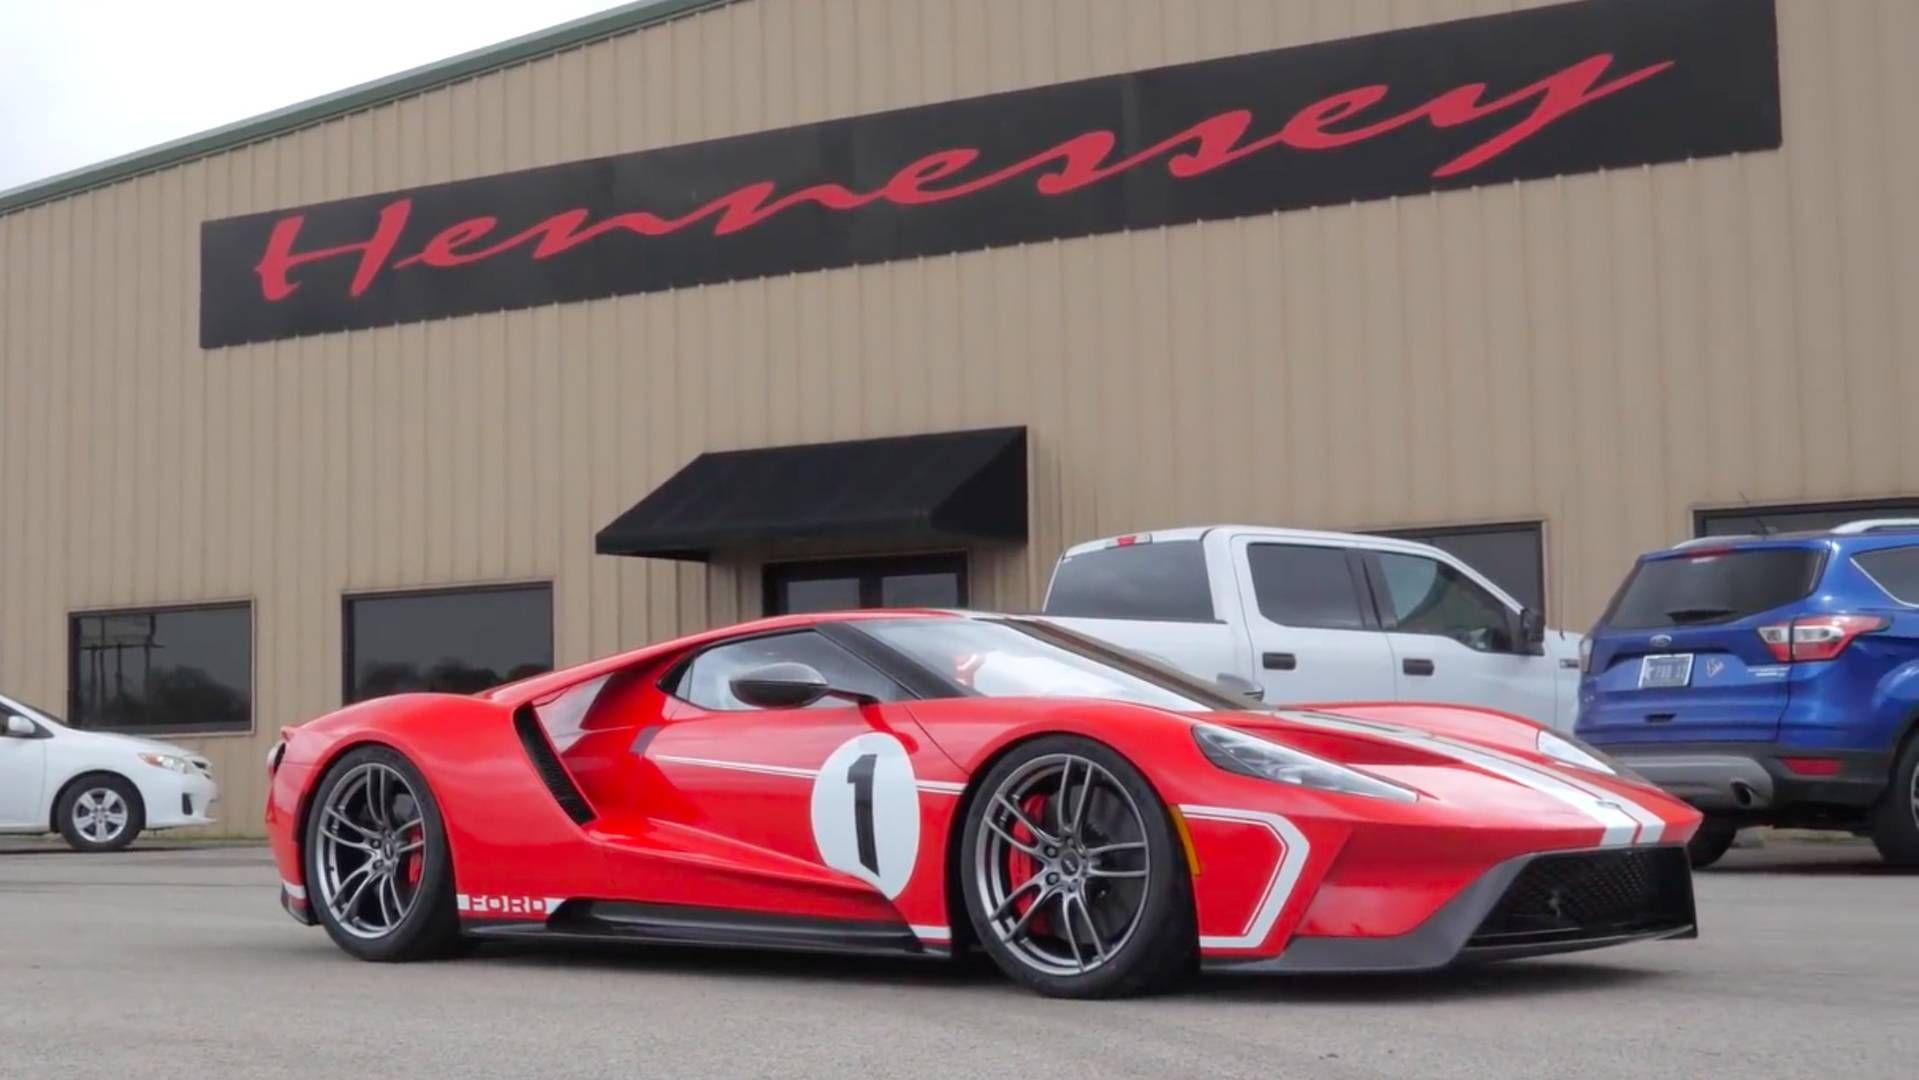 Hennessey Performance Car Logo - Watch Hennessey Take Delivery Of Its Ford GT Heritage Supercar